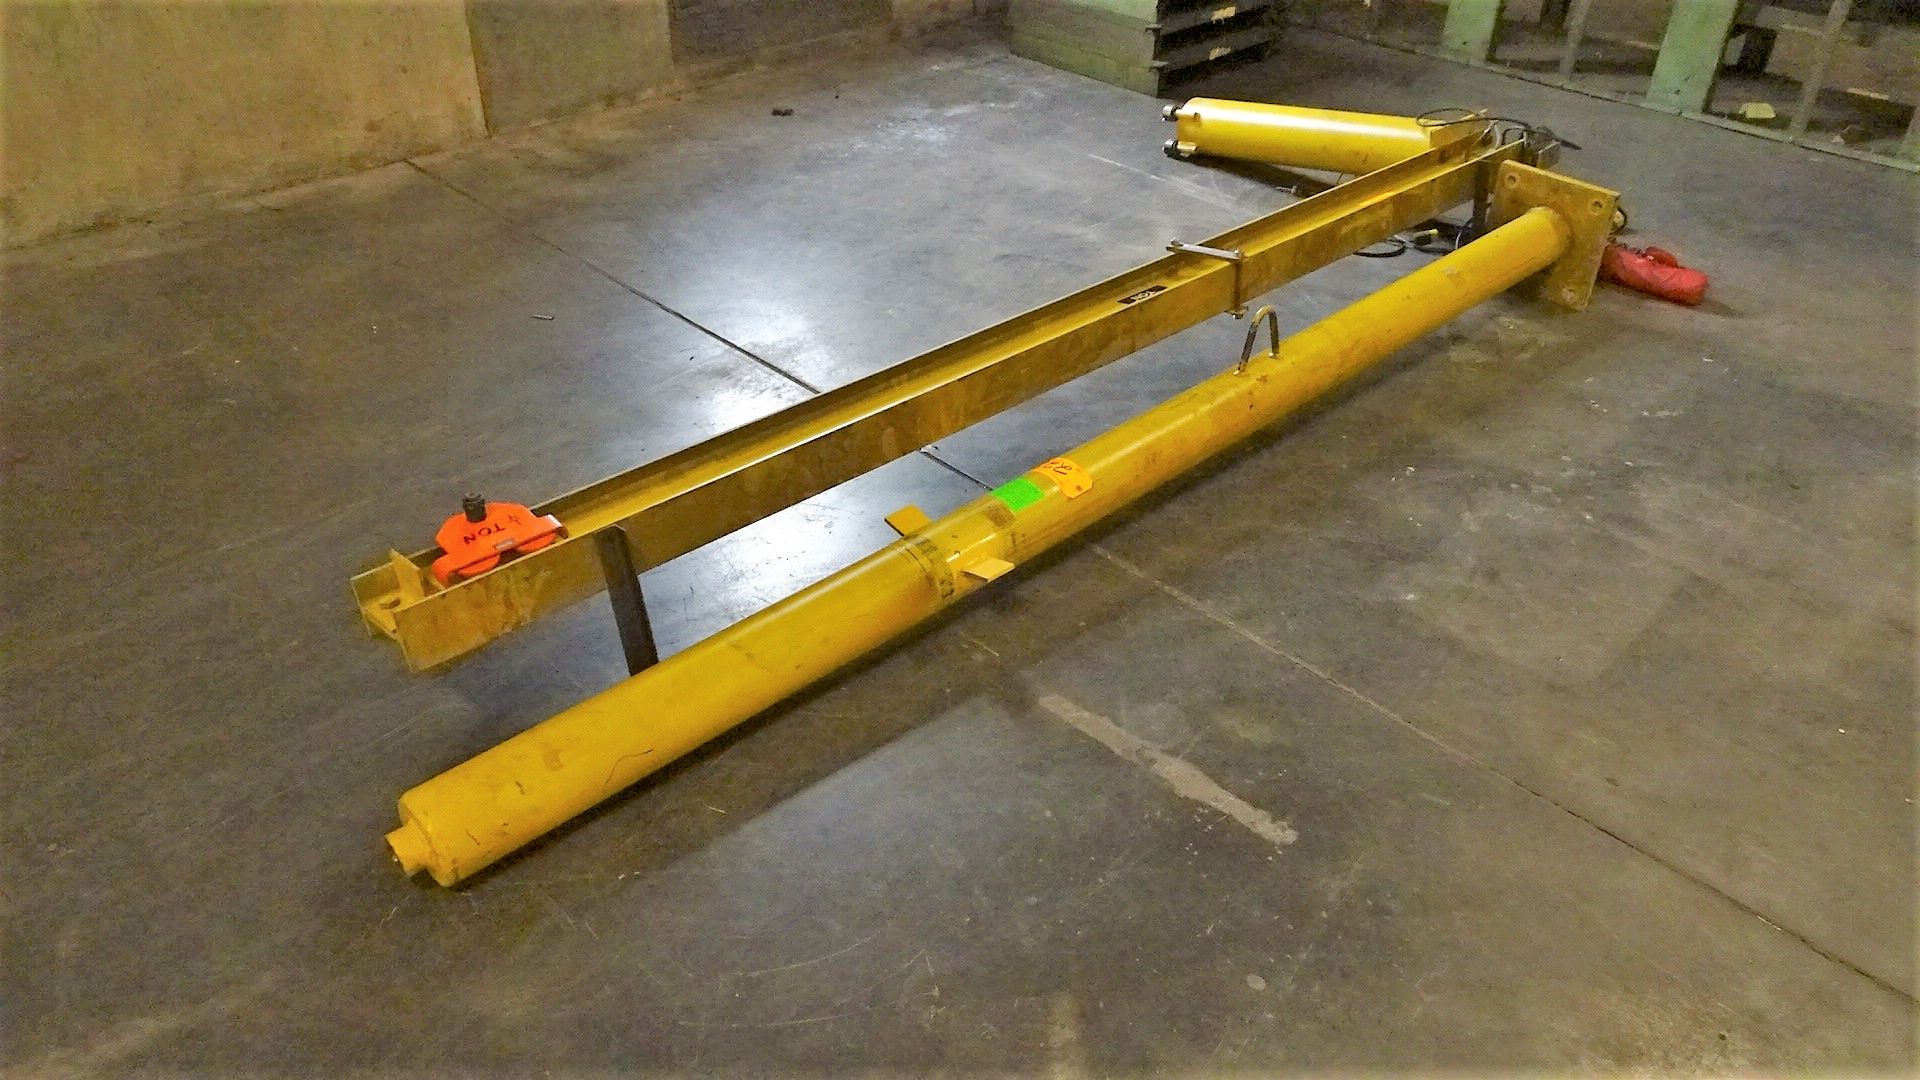 Free Standing Jib Crane with Approx 10' Column, 10' Swing Arm & Coffing 1/4-Ton Electric Chain